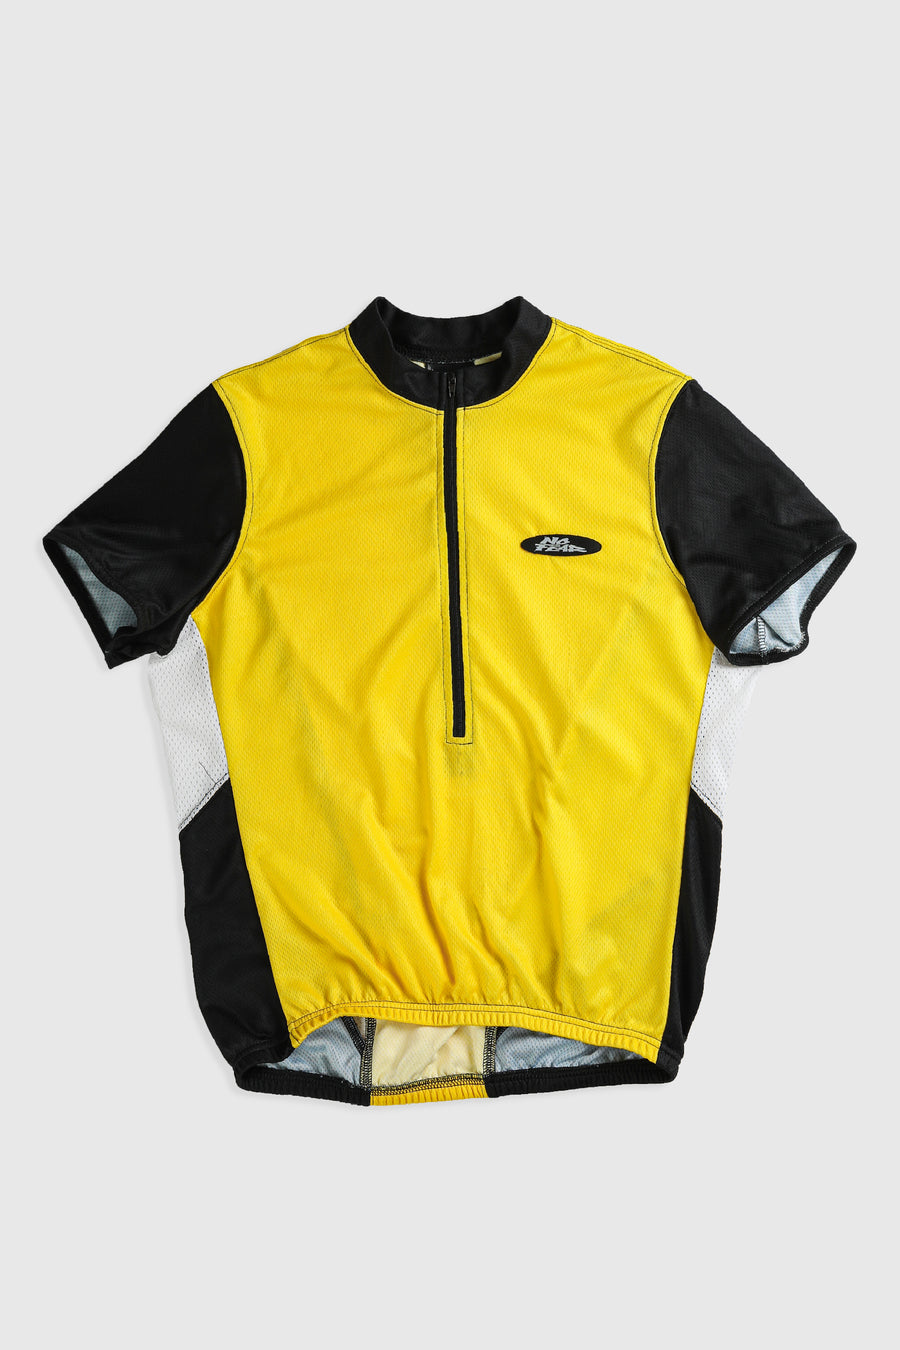 No Fear Cycling Jersey - S